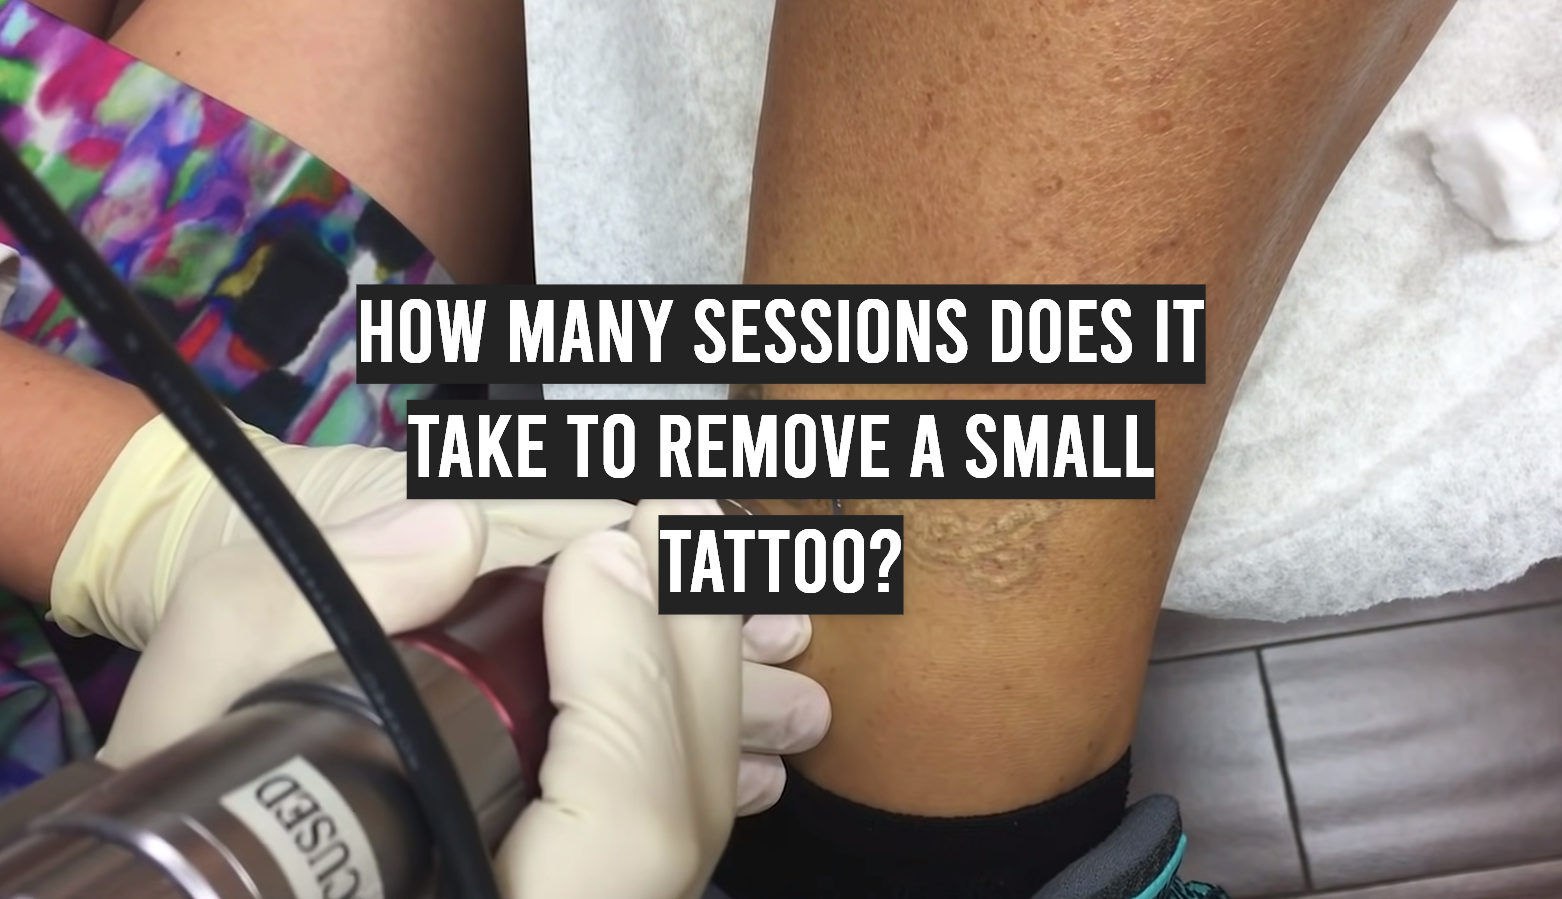 How Many Sessions Does It Take To Remove a Small Tattoo?